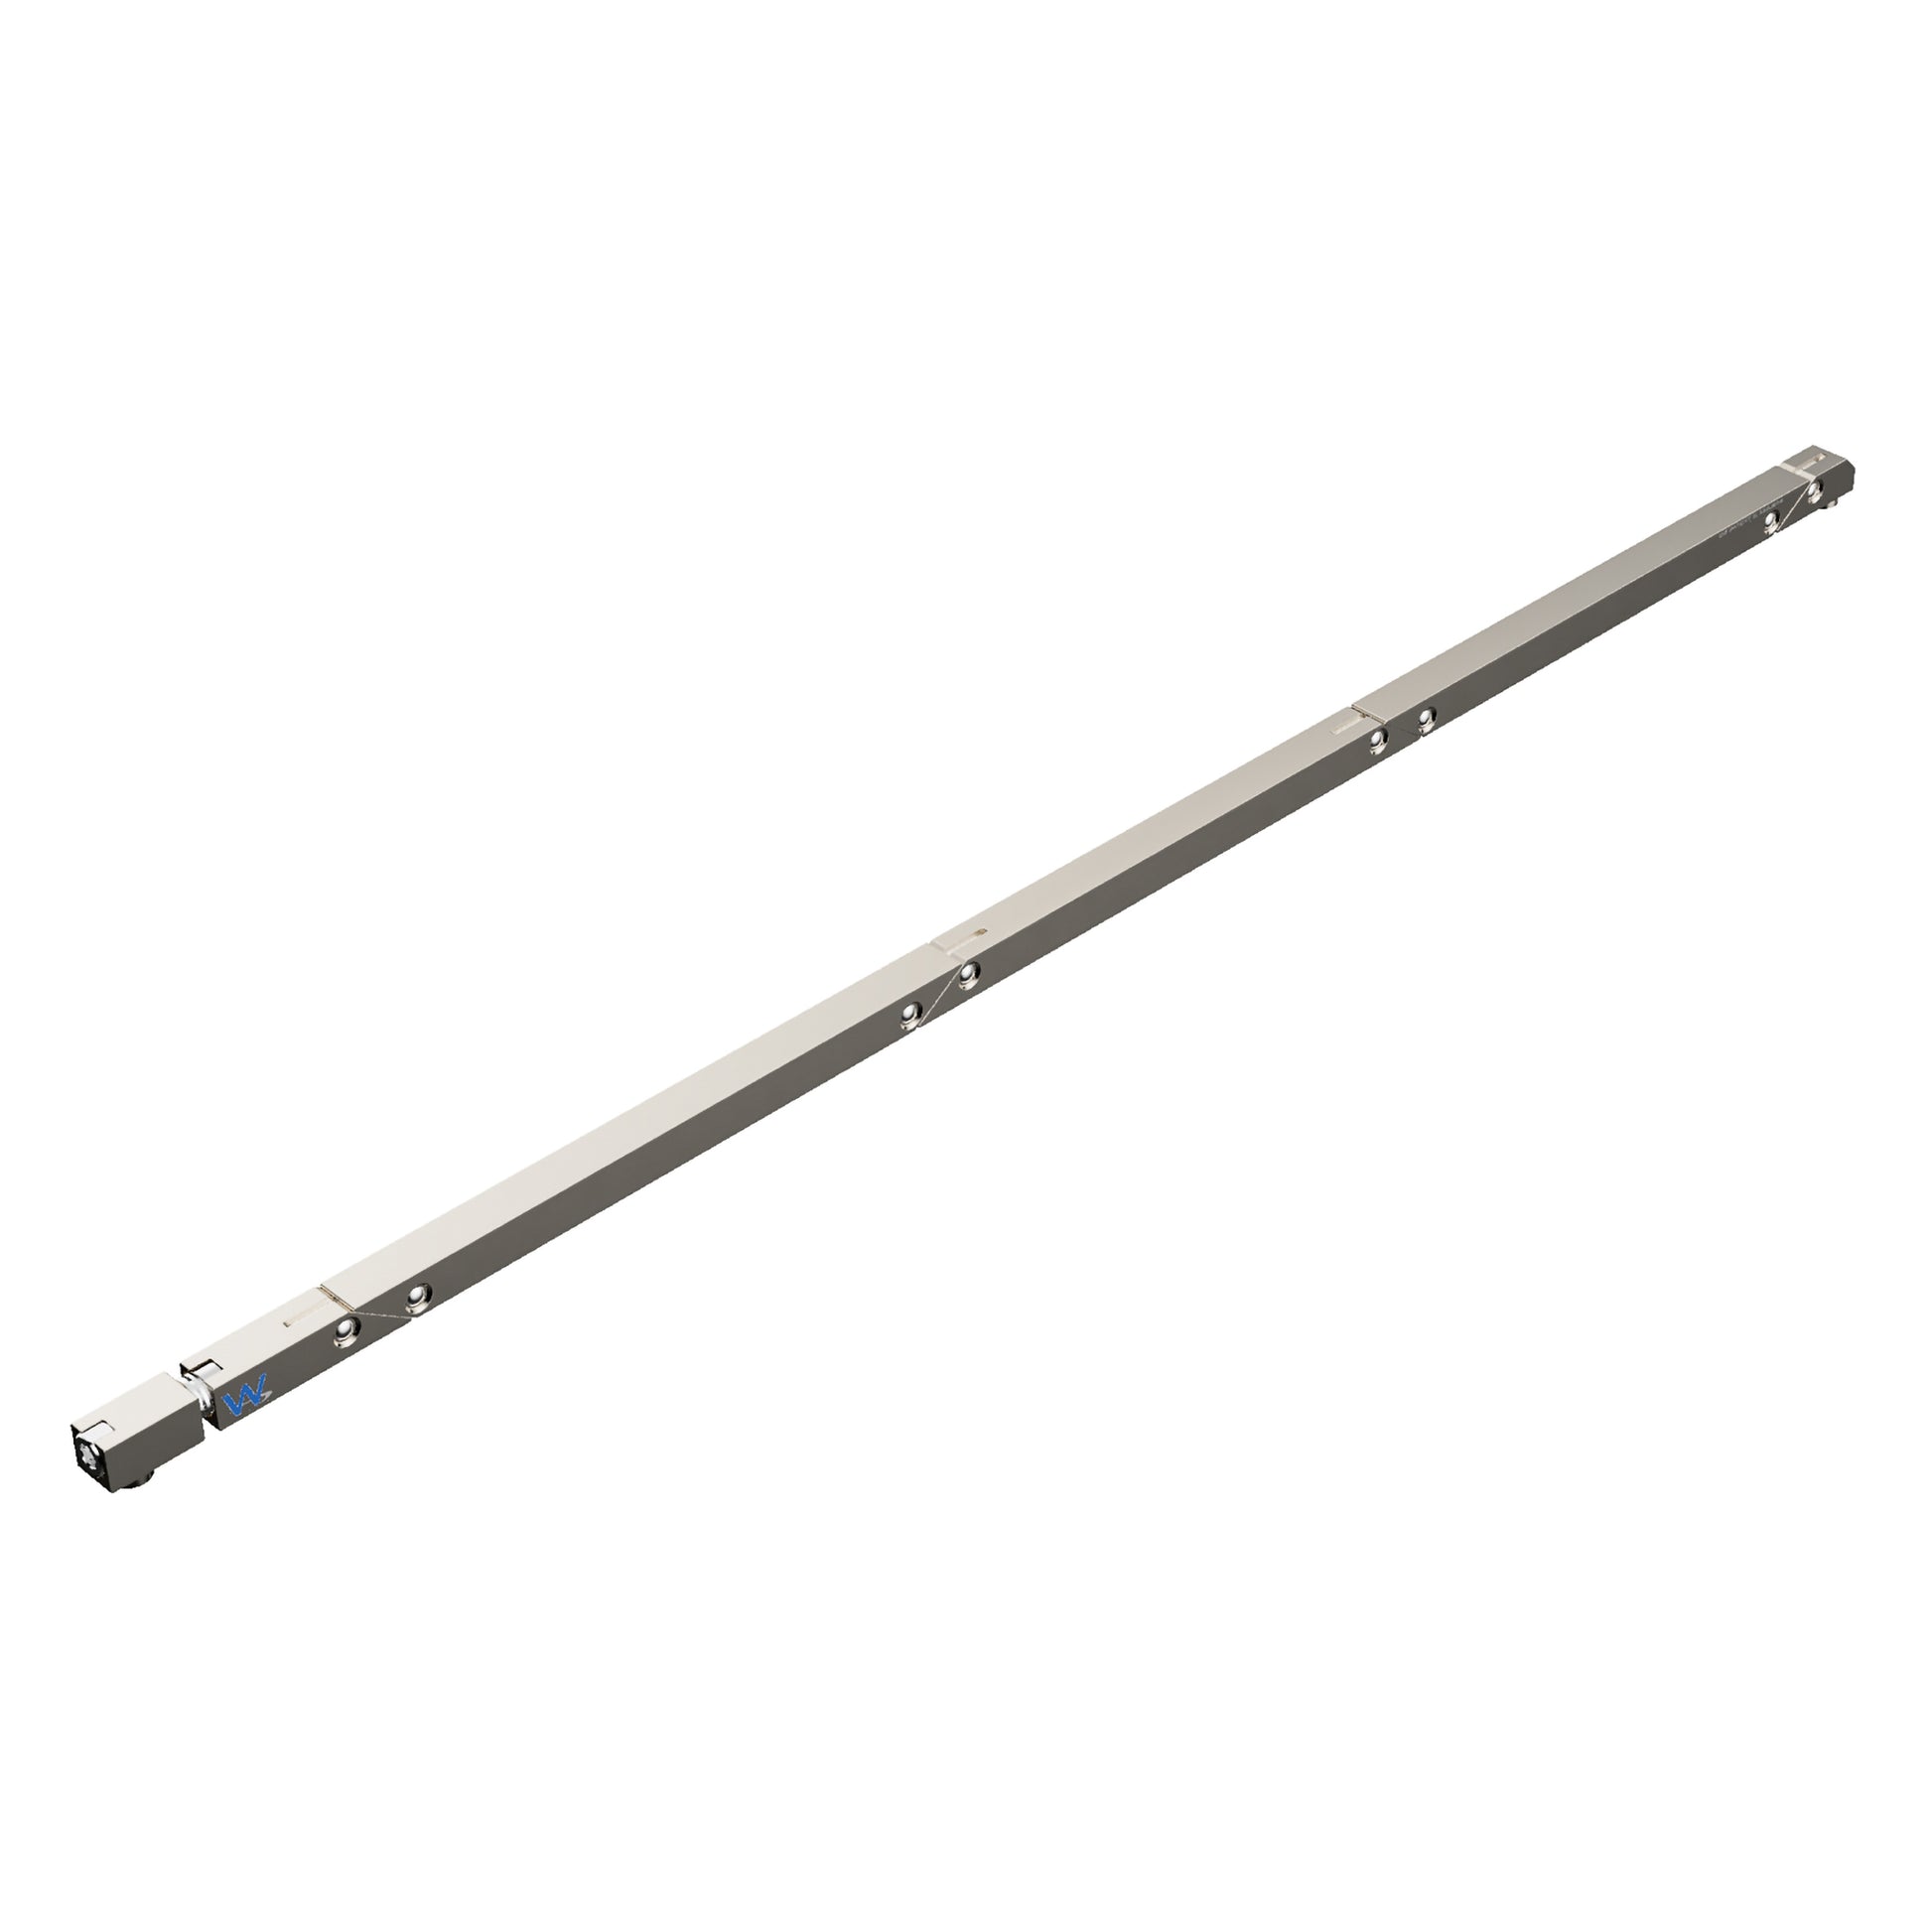 SW5-180-375-375 MAGNUM Wedgelock, segmented long rectulangular hardware component, Electroless Nickel Plated